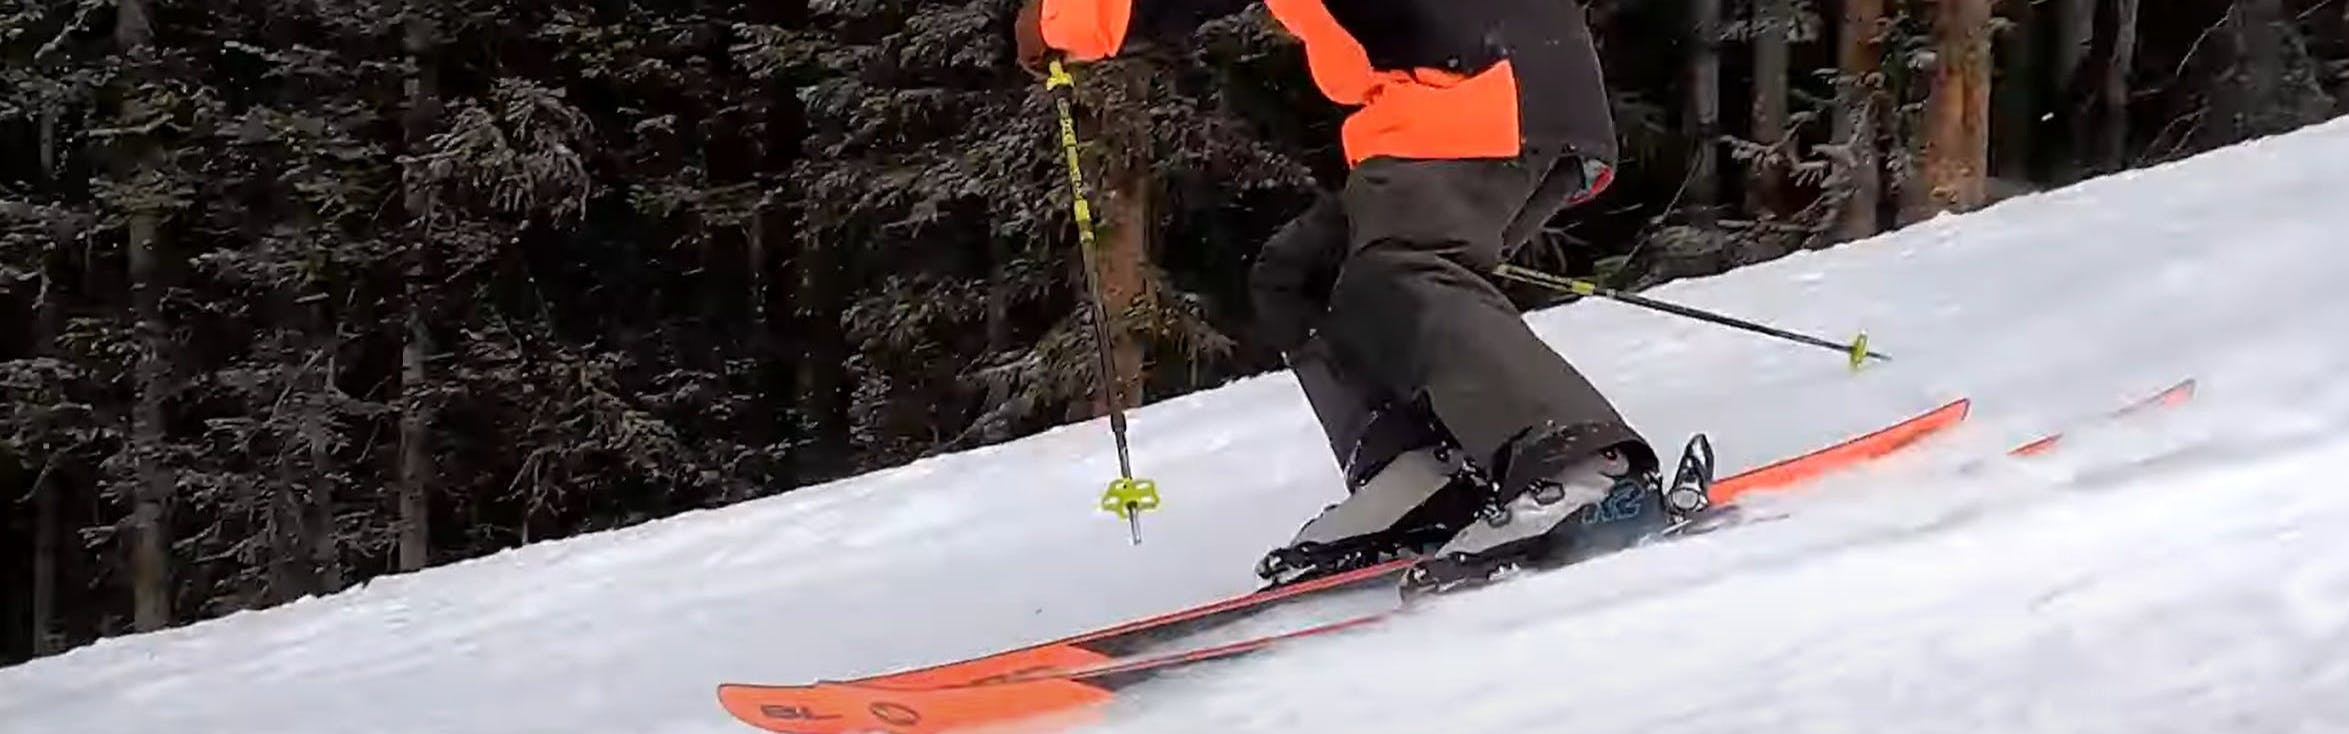 A skier turning down a mountain with the Mindbender 120 ski boots. 